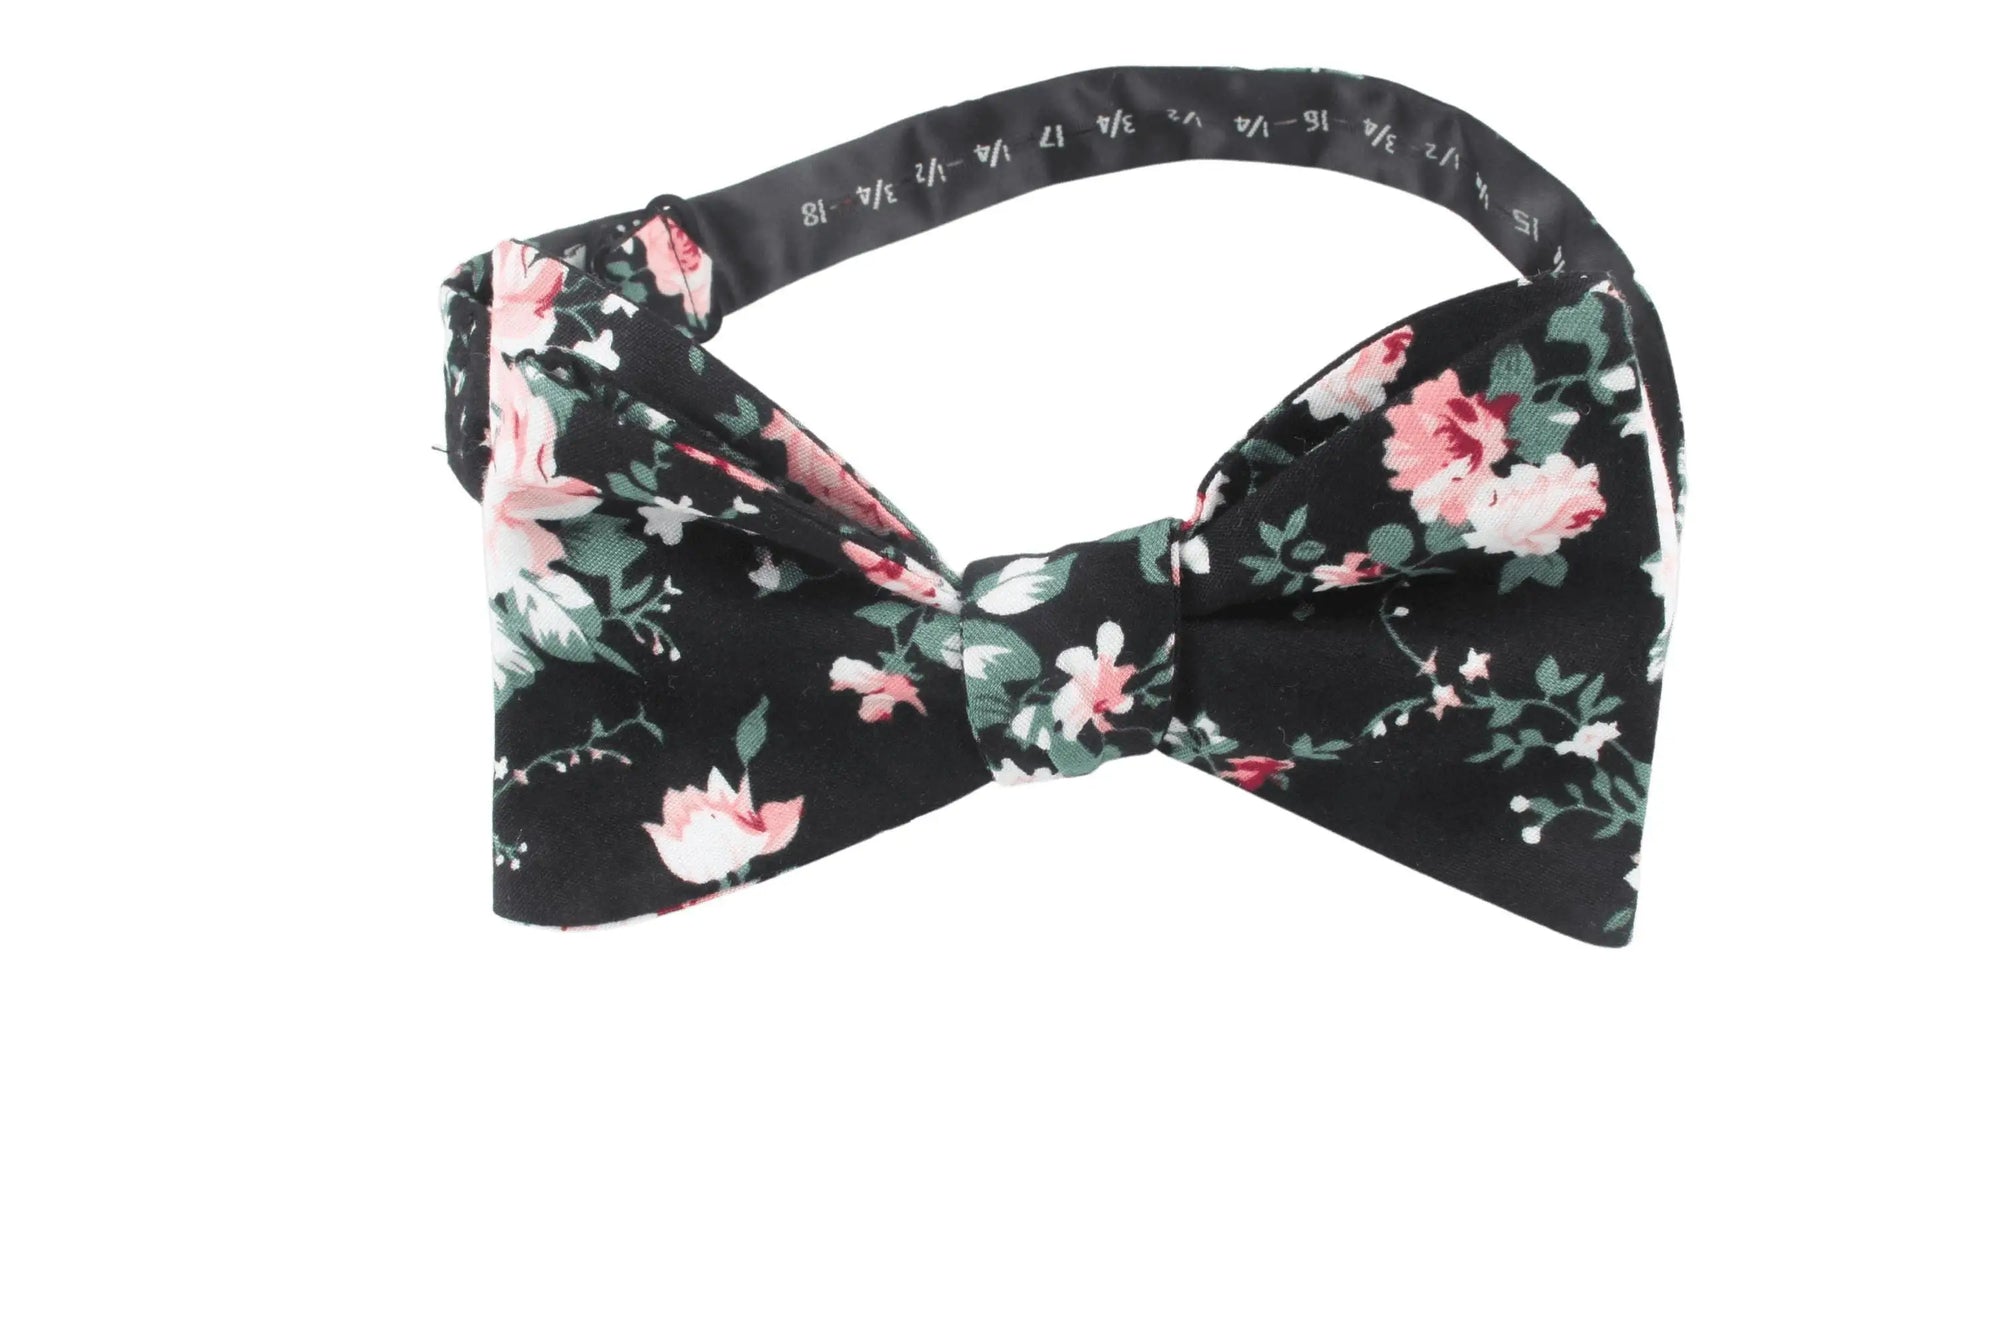 Black Floral Bow Tie Self Tie - DAN - MYTIESHOP-Black Floral Bow Tie Self Tie 100% Cotton Flannel Handmade Adjustable to fit most neck sizes 13 3/4&quot; - 18&quot; Color: Black Bow Tie Great for Prom Dinners Interviews Photo shoots Photo sessions Dates Groom to stand out between his Groomsmen pair them up with neckties while he wears the bow tie. Floral self tie bow tie for weddings and events. Great anniversary present and gift. Also great gift for the groom and his groomsmen to wear at the wedding, and